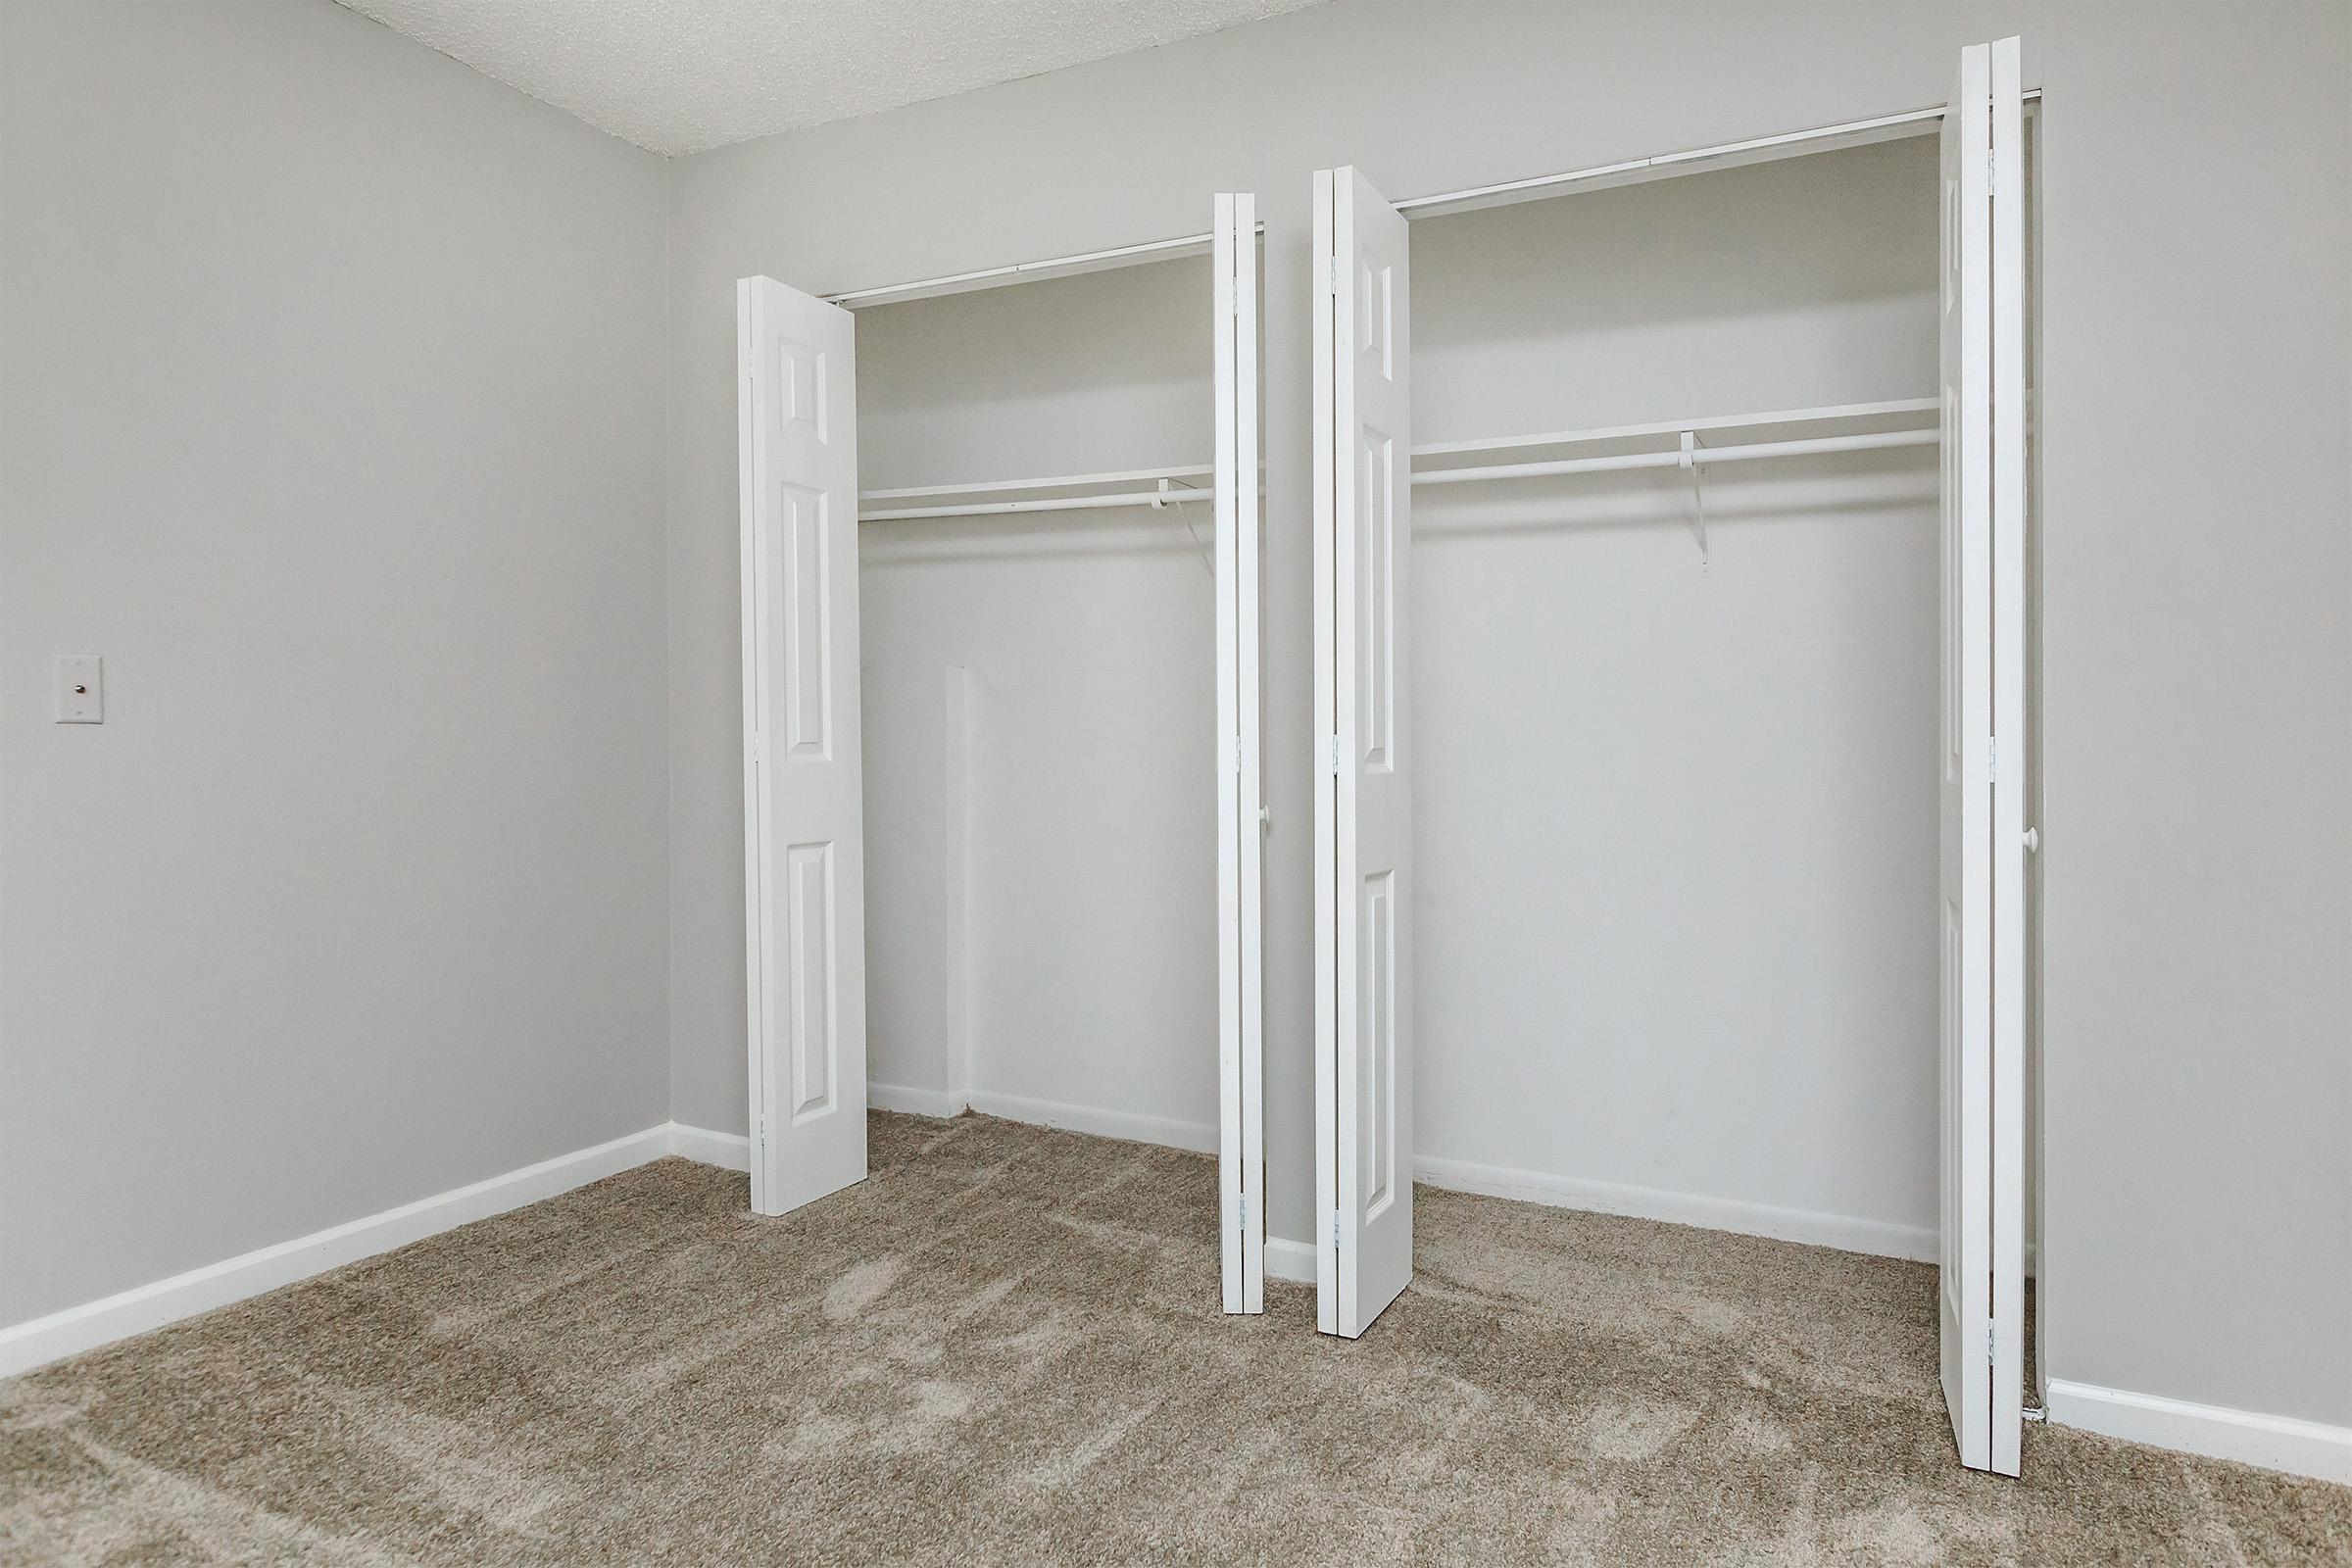 WE HAVE WALK-IN CLOSETS AT KINGSTON POINTE APARTMENTS